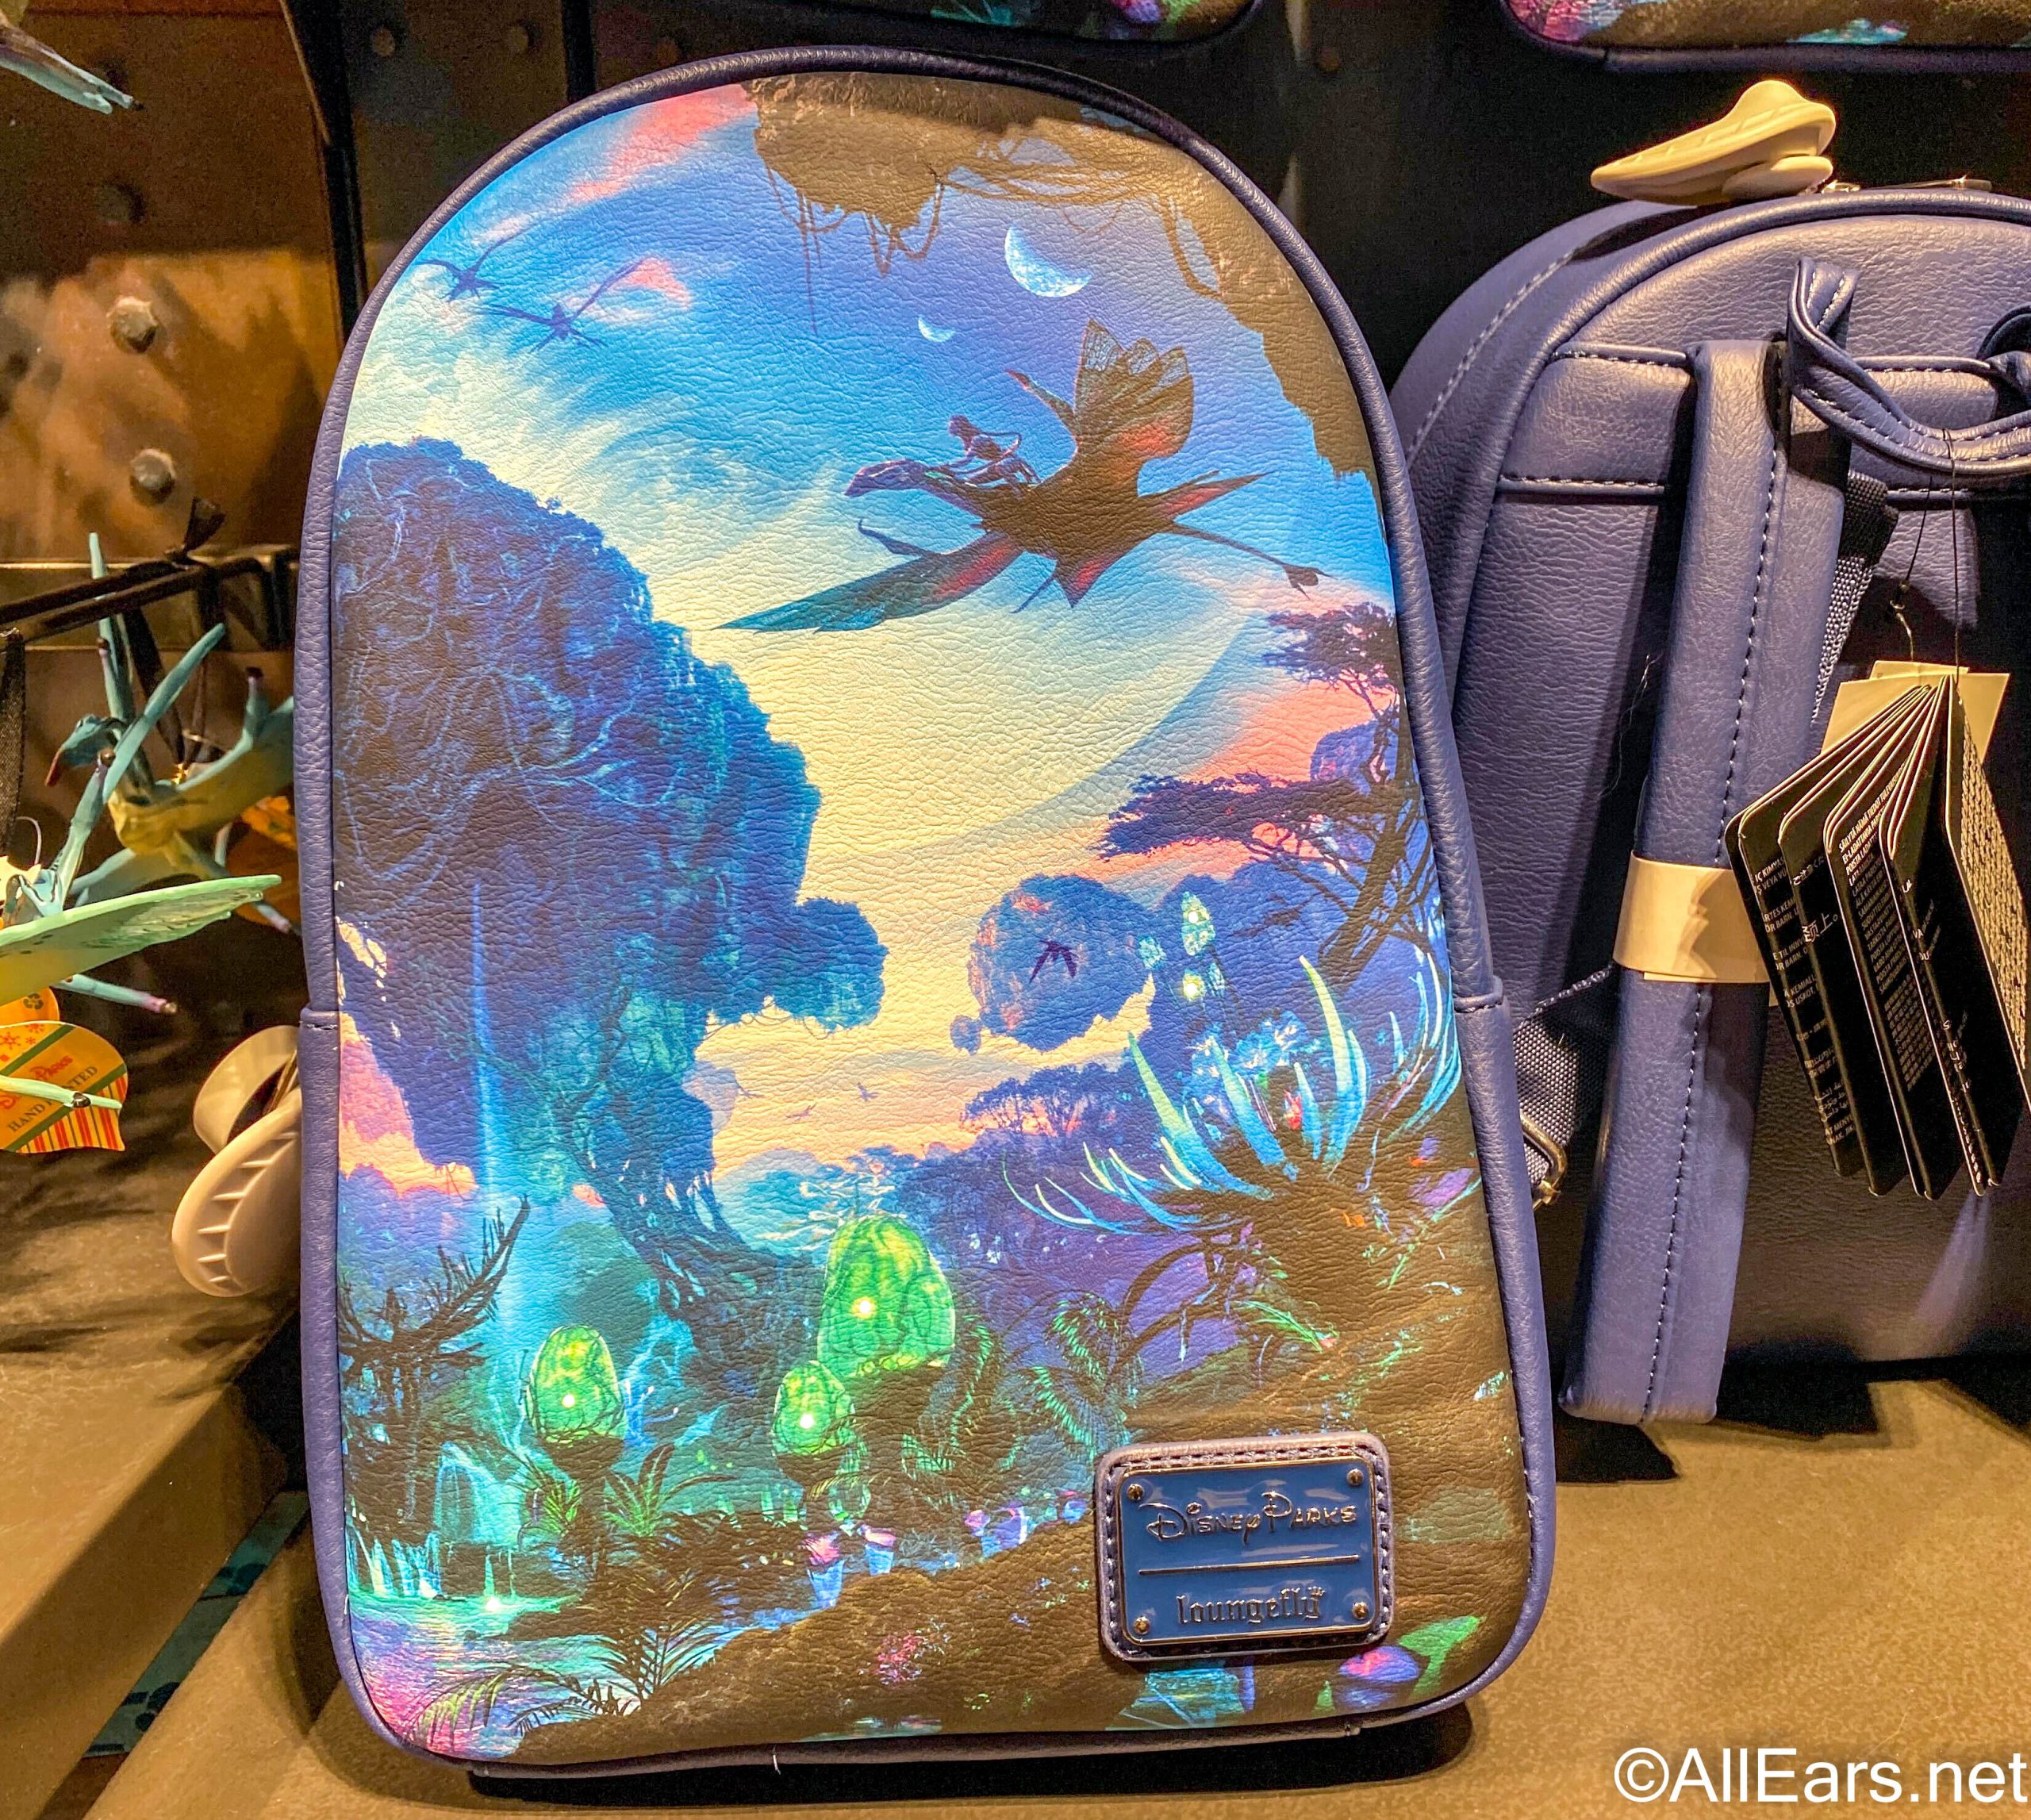 2022-wdw-windtraders-loungefly-pandora-world-of-avatar-backpack